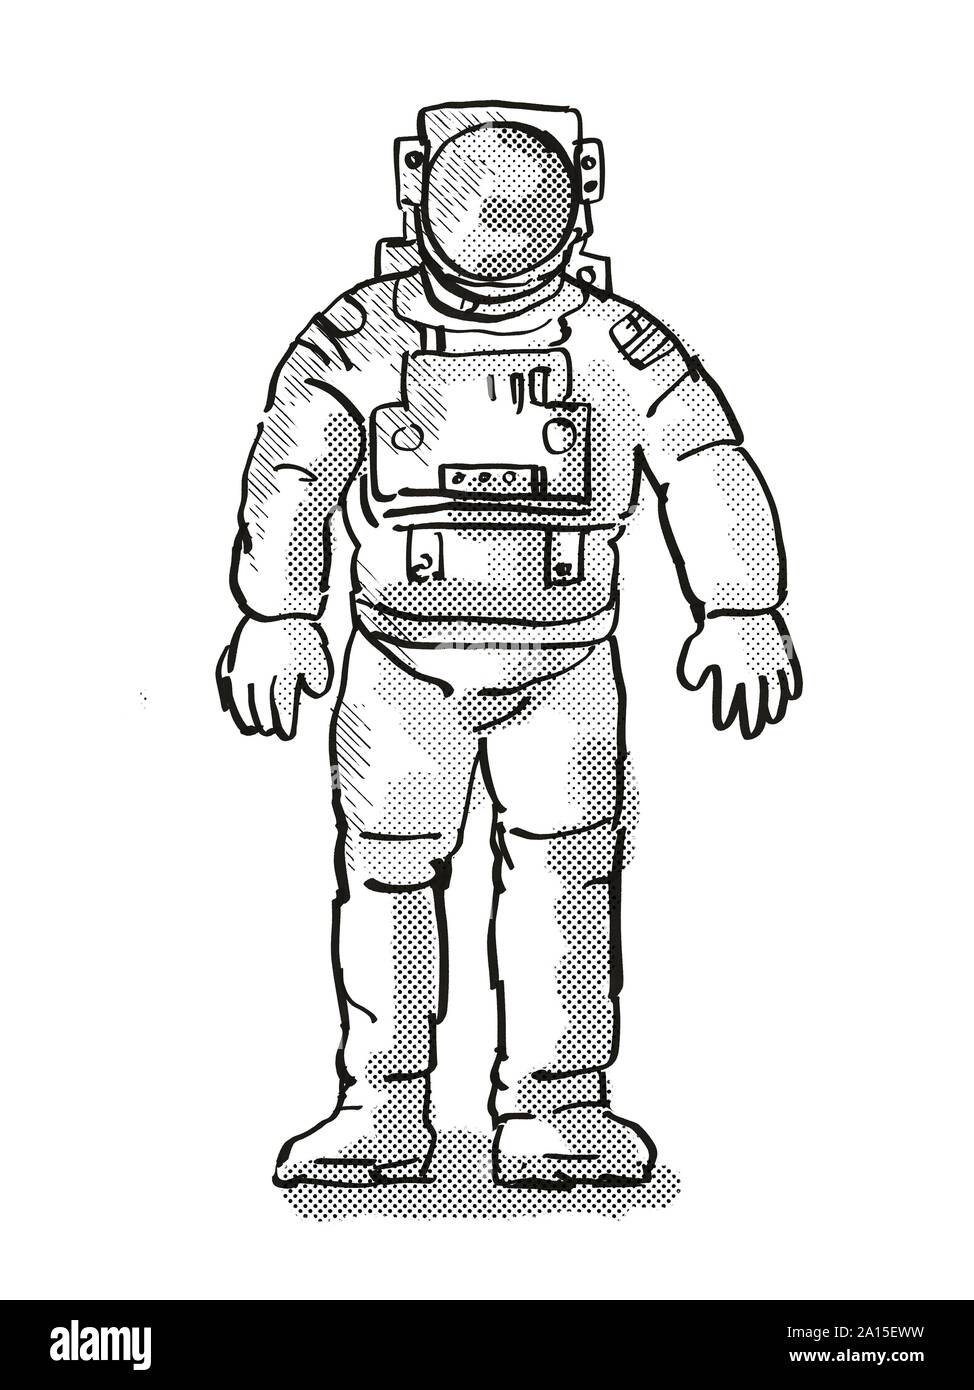 Vintage astronaut Cut Out Stock Images & Pictures - Alamy